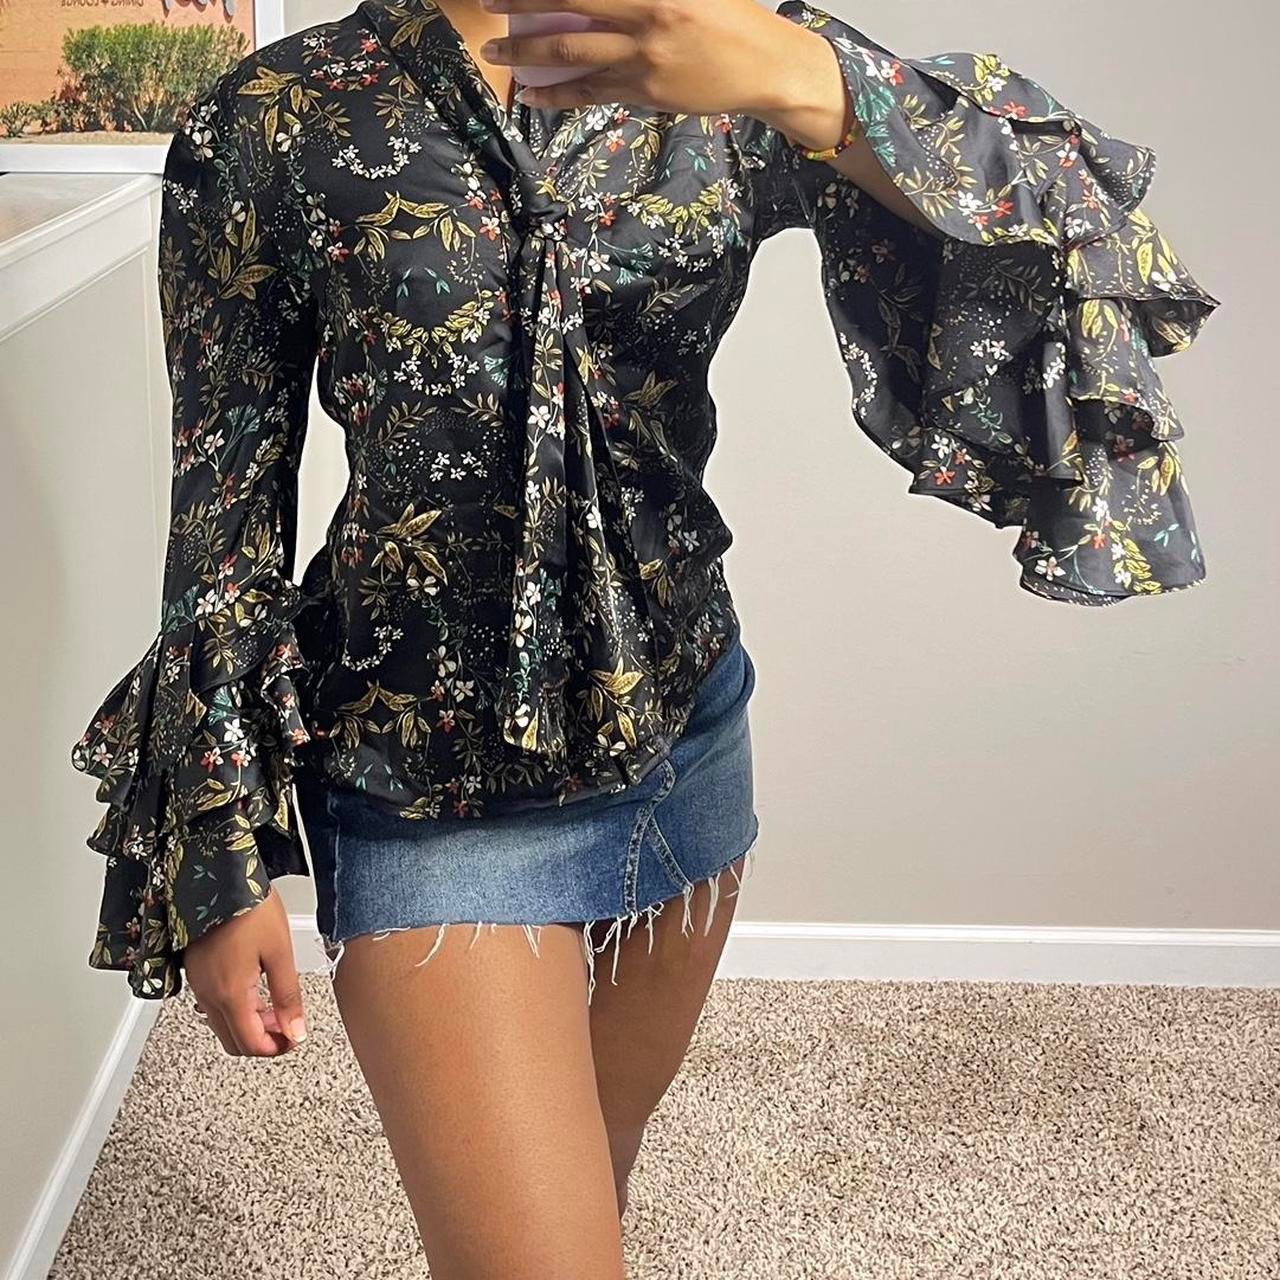 where to buy  FLORAL BLOUSE TOP MWs4q0zB0 just buy it